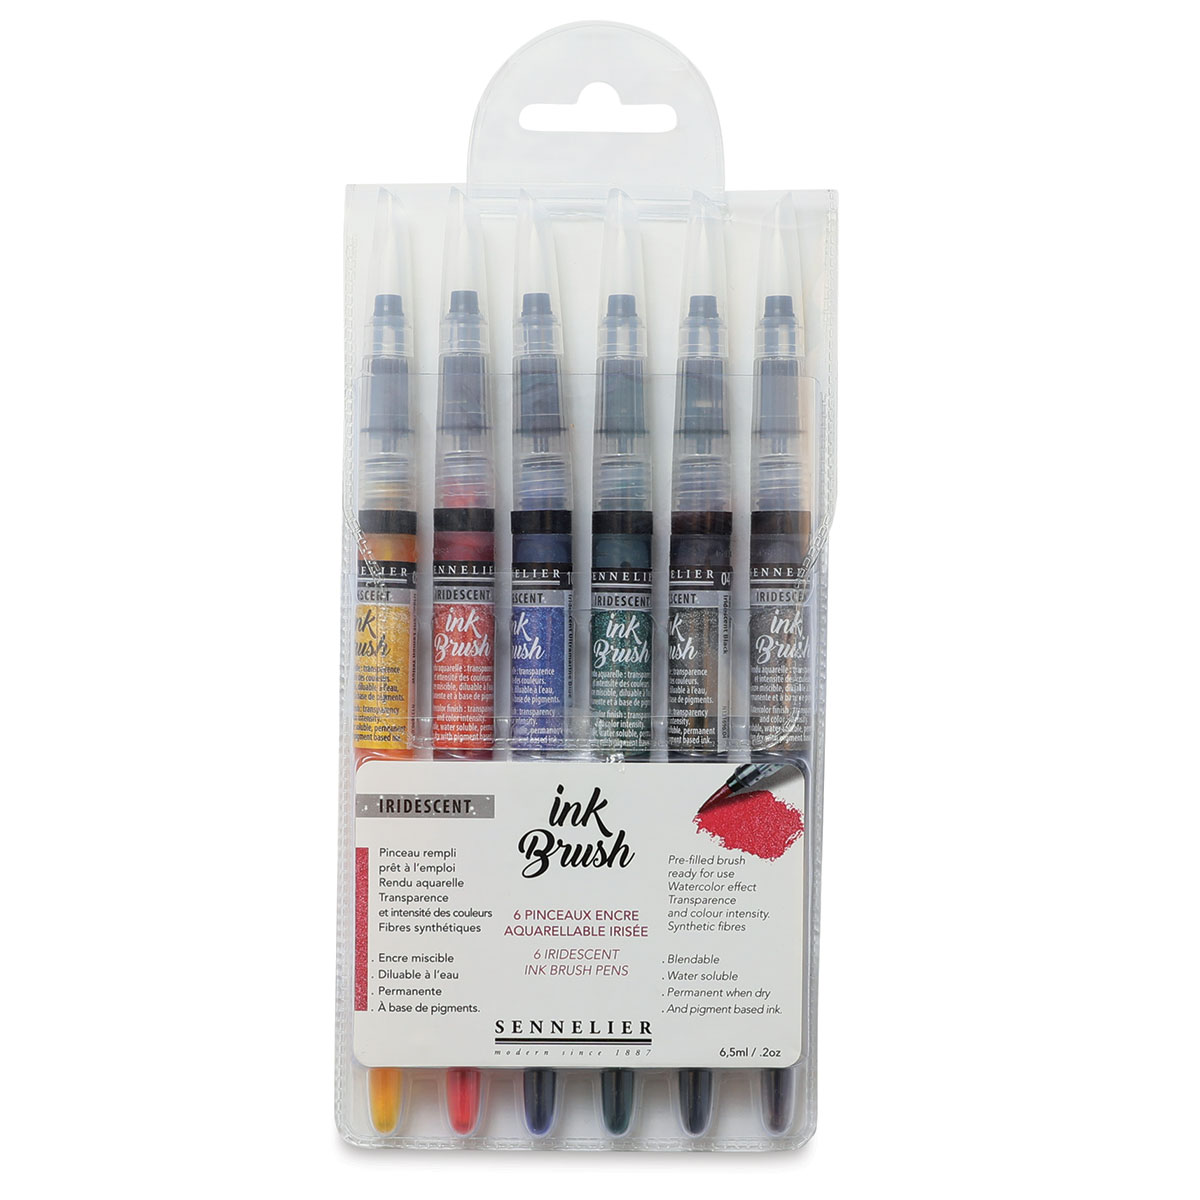 Sennelier Delacroix Spray Fixative for Pencils and Charcoals